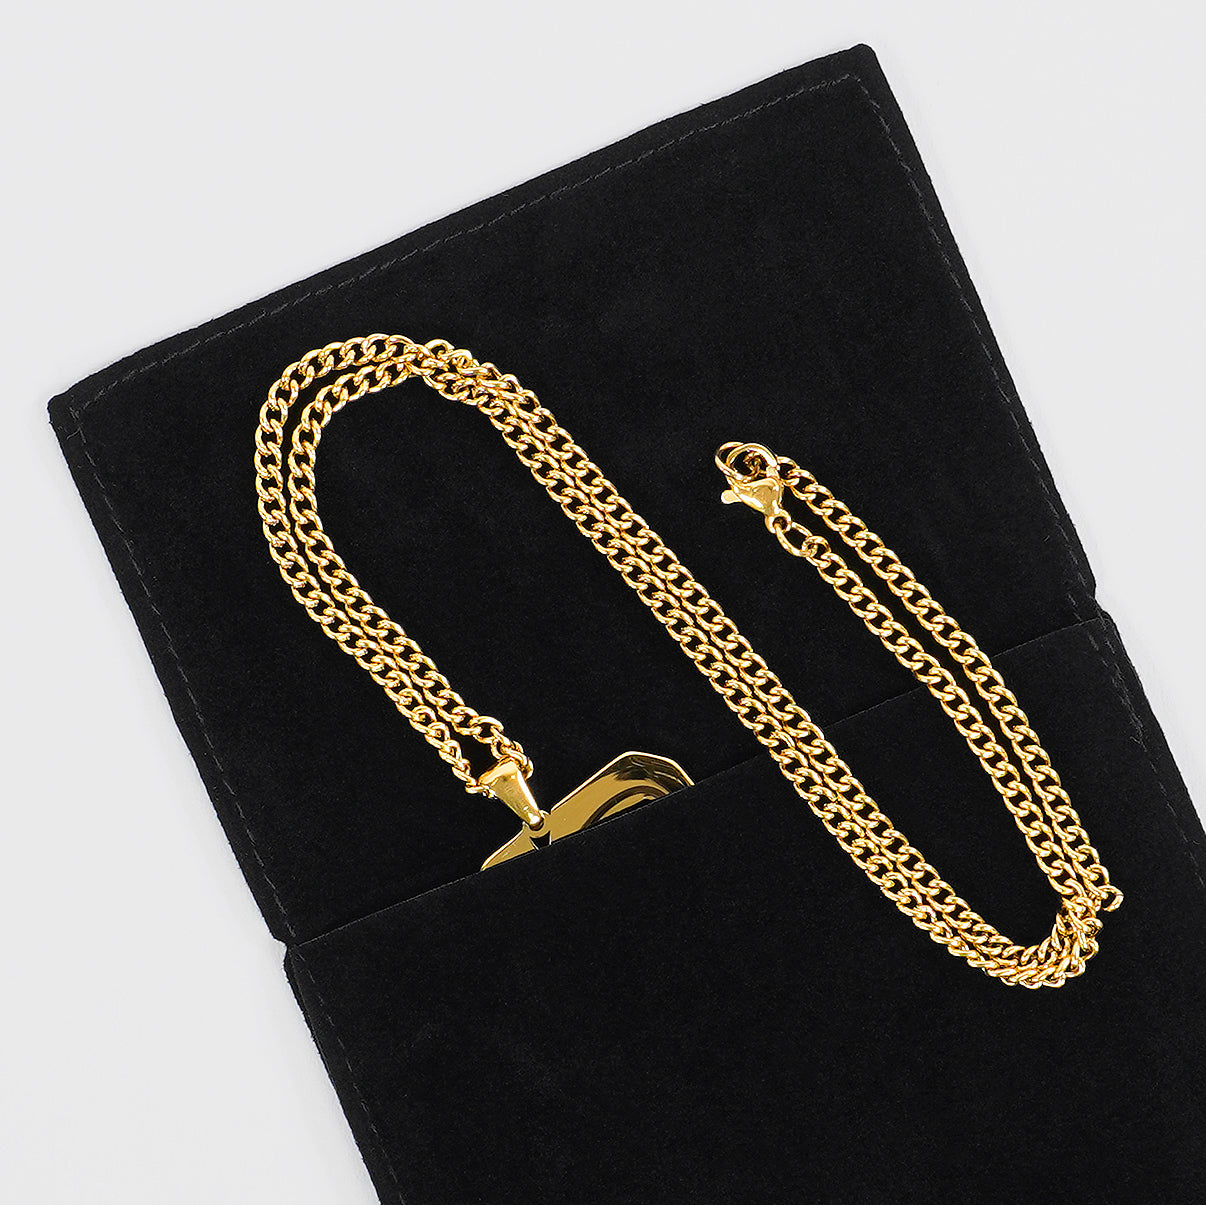 7 Number Pendant with Chain Necklace - Gold Plated Stainless Steel